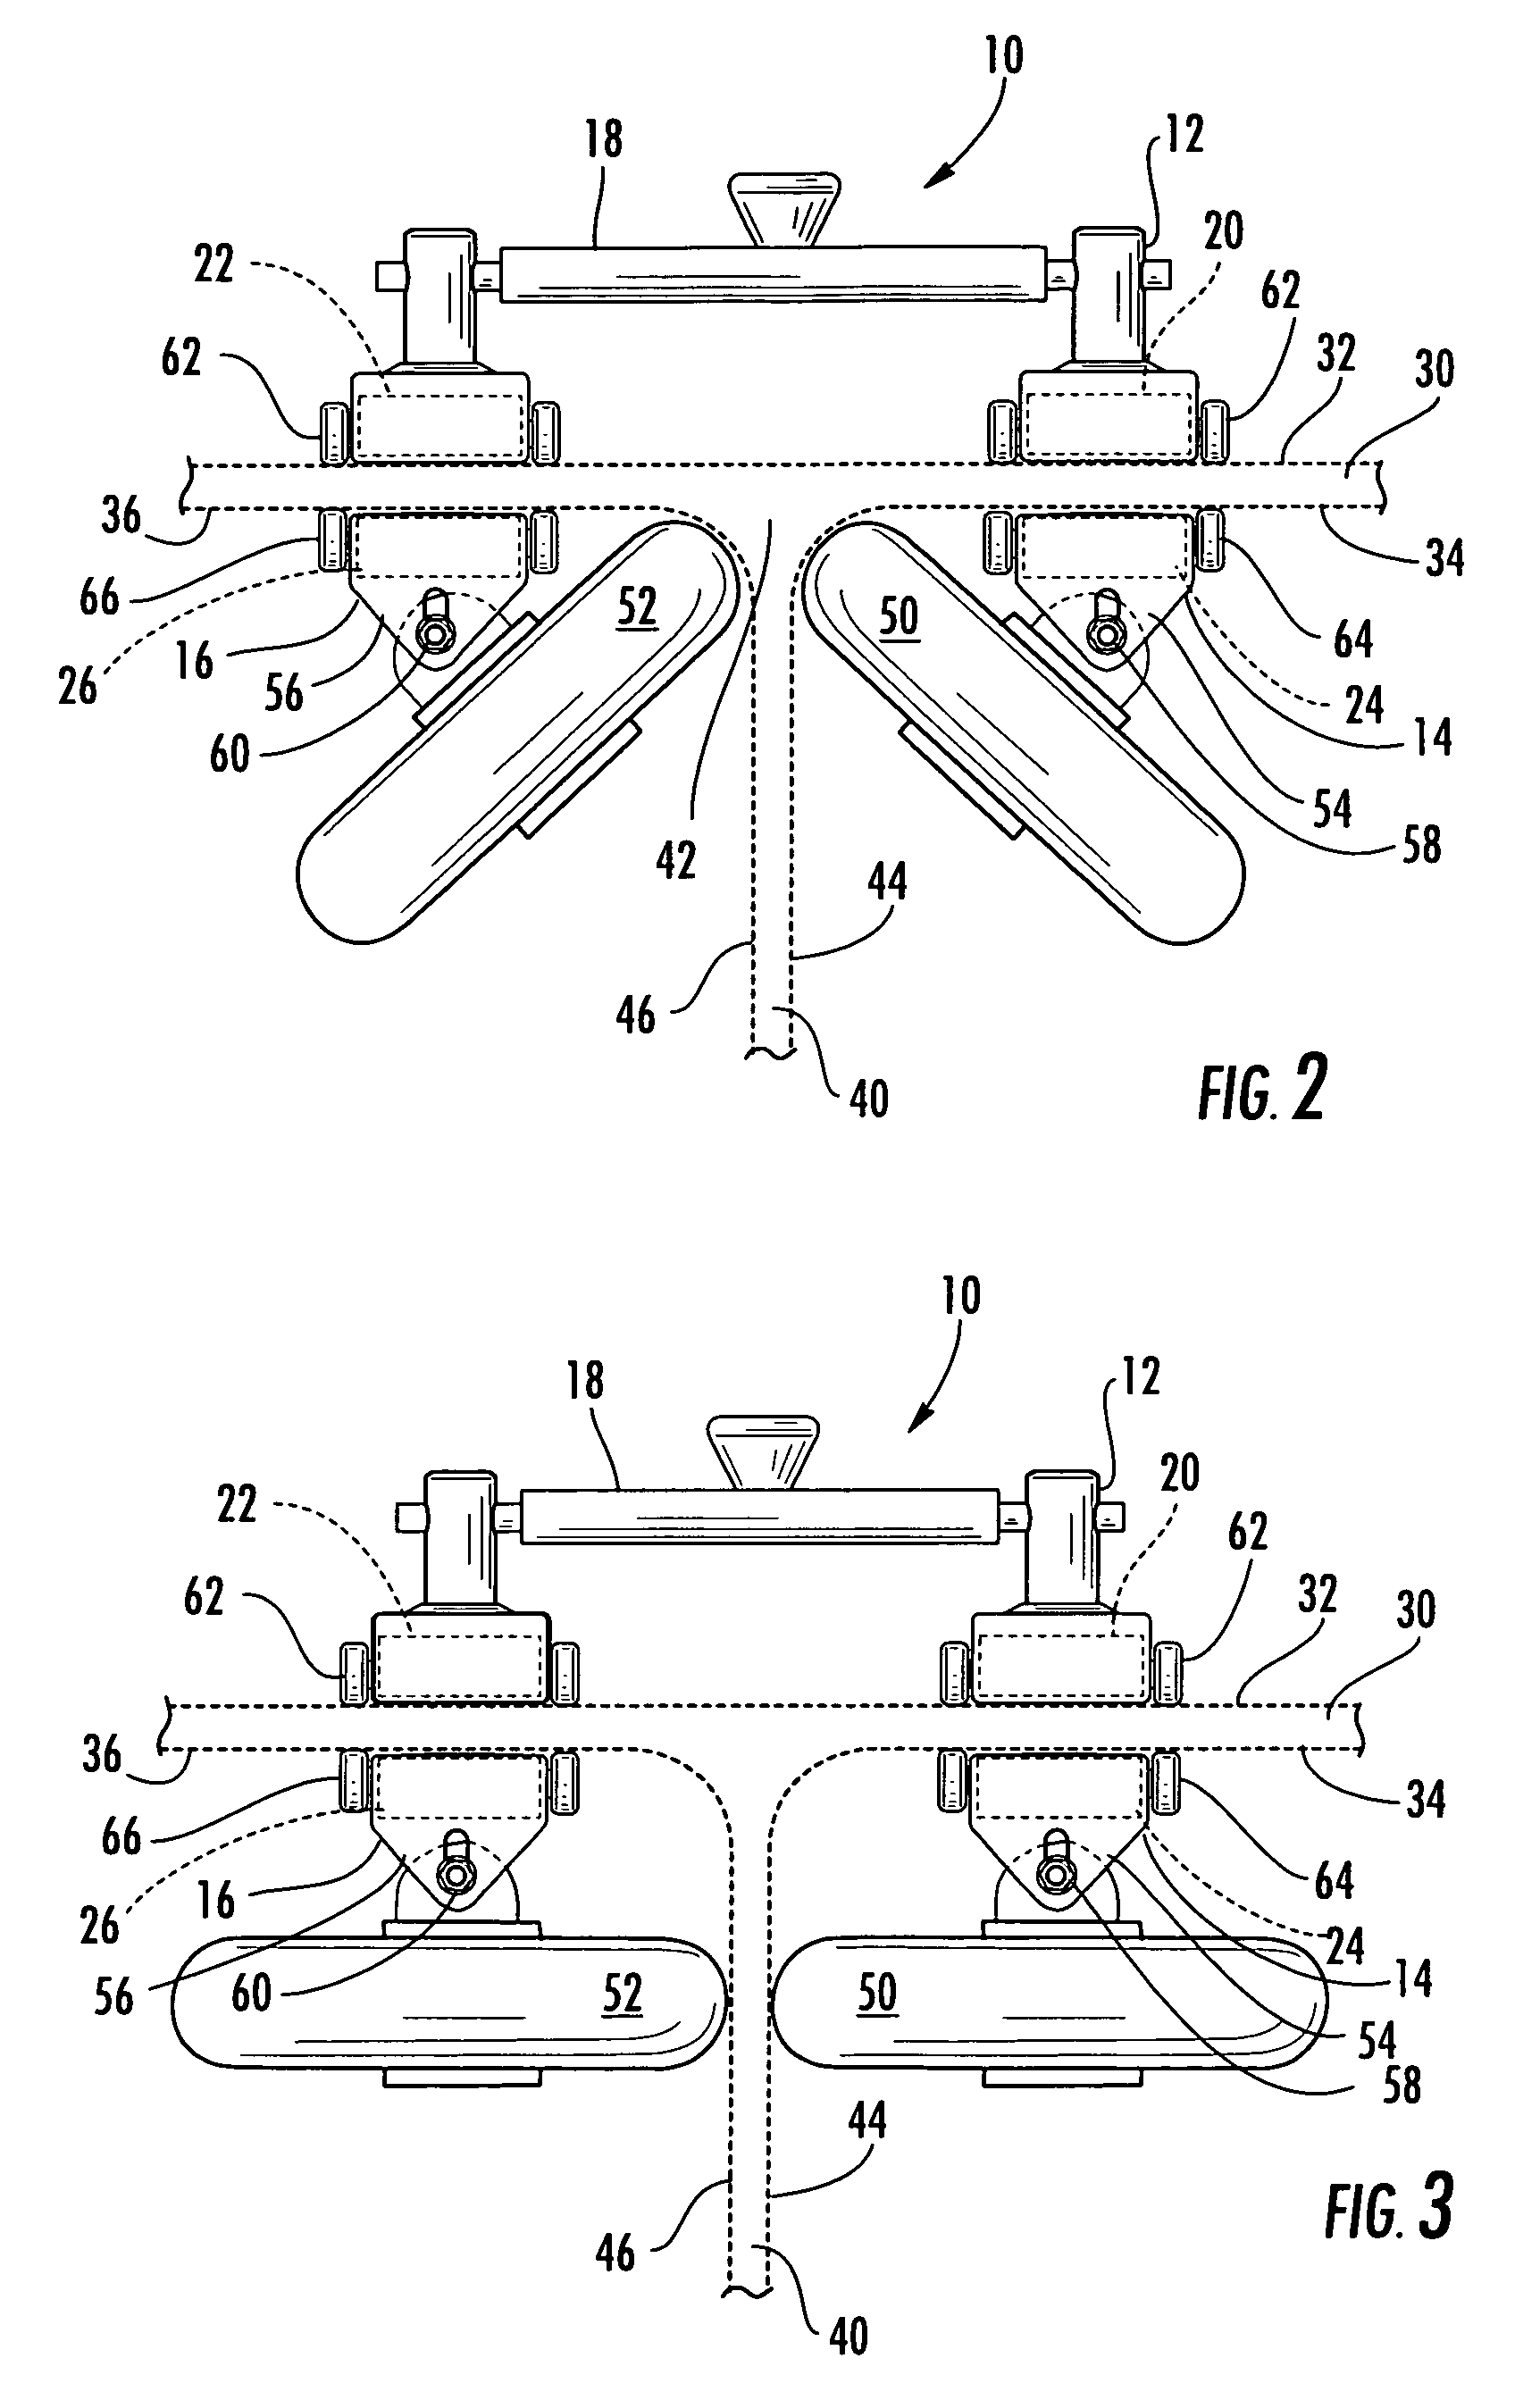 Remote radius inspection tool for composite joints